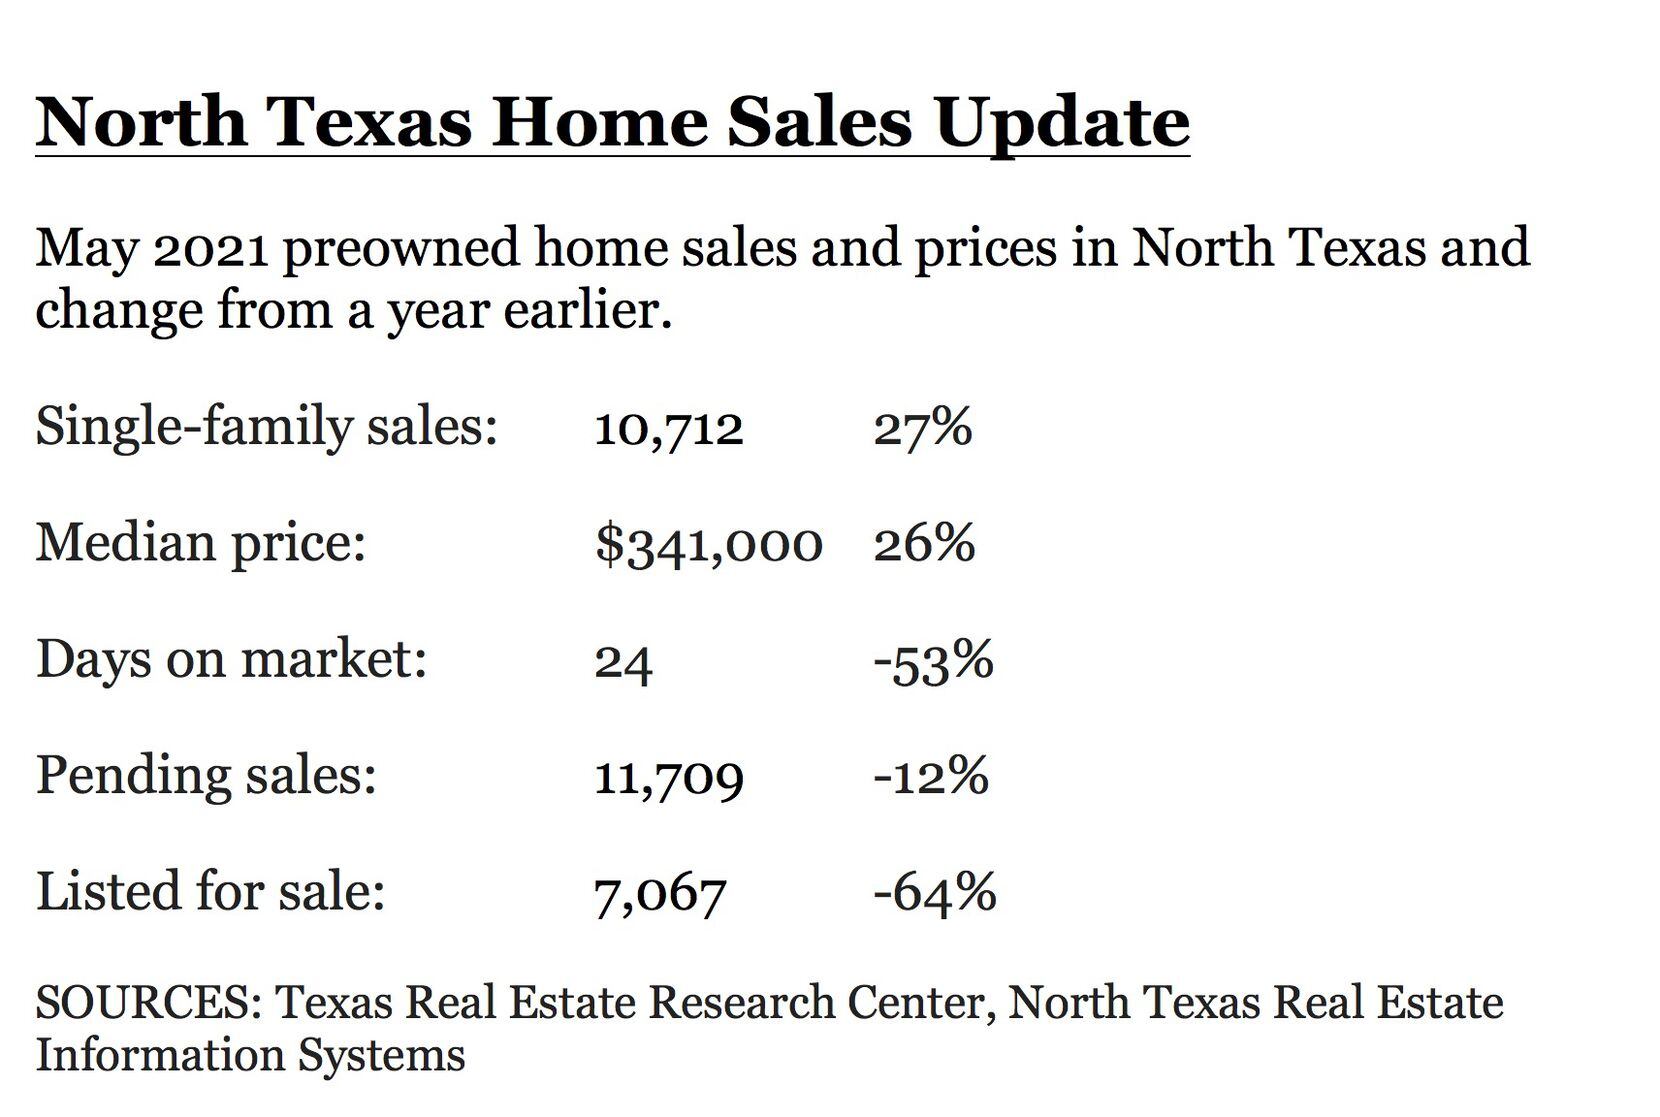 North Texas Home Prices Rocket 26% Higher in May